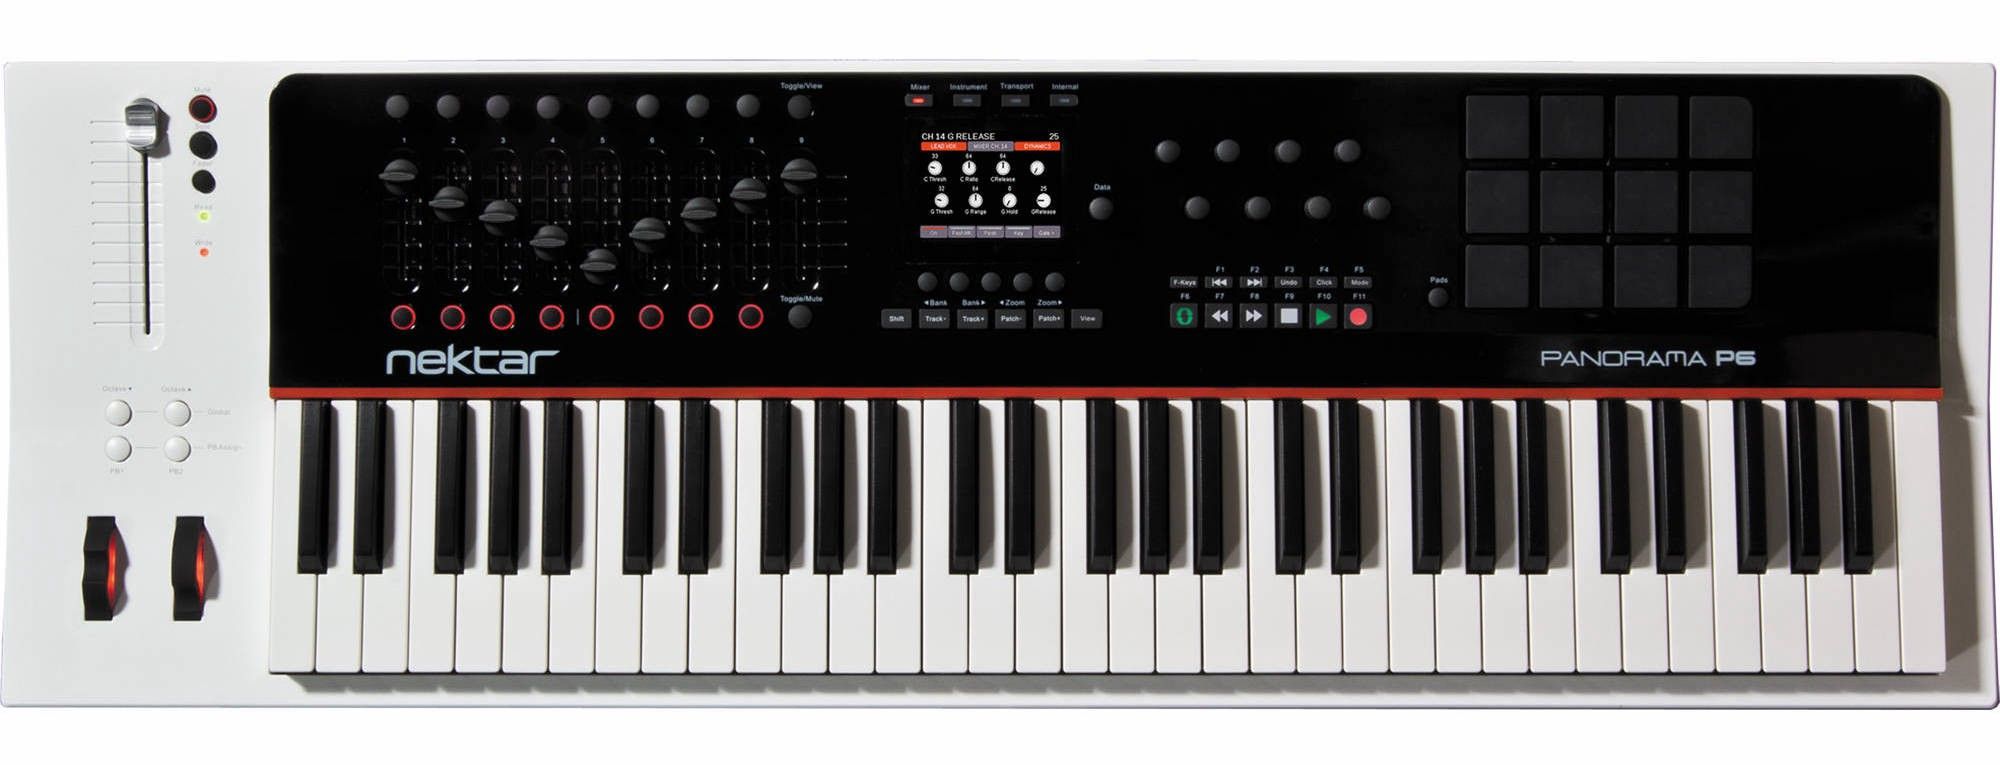 This is the MIDI keyboard I use, in case anyone is curious. It’s a Nektar Panorama P6.